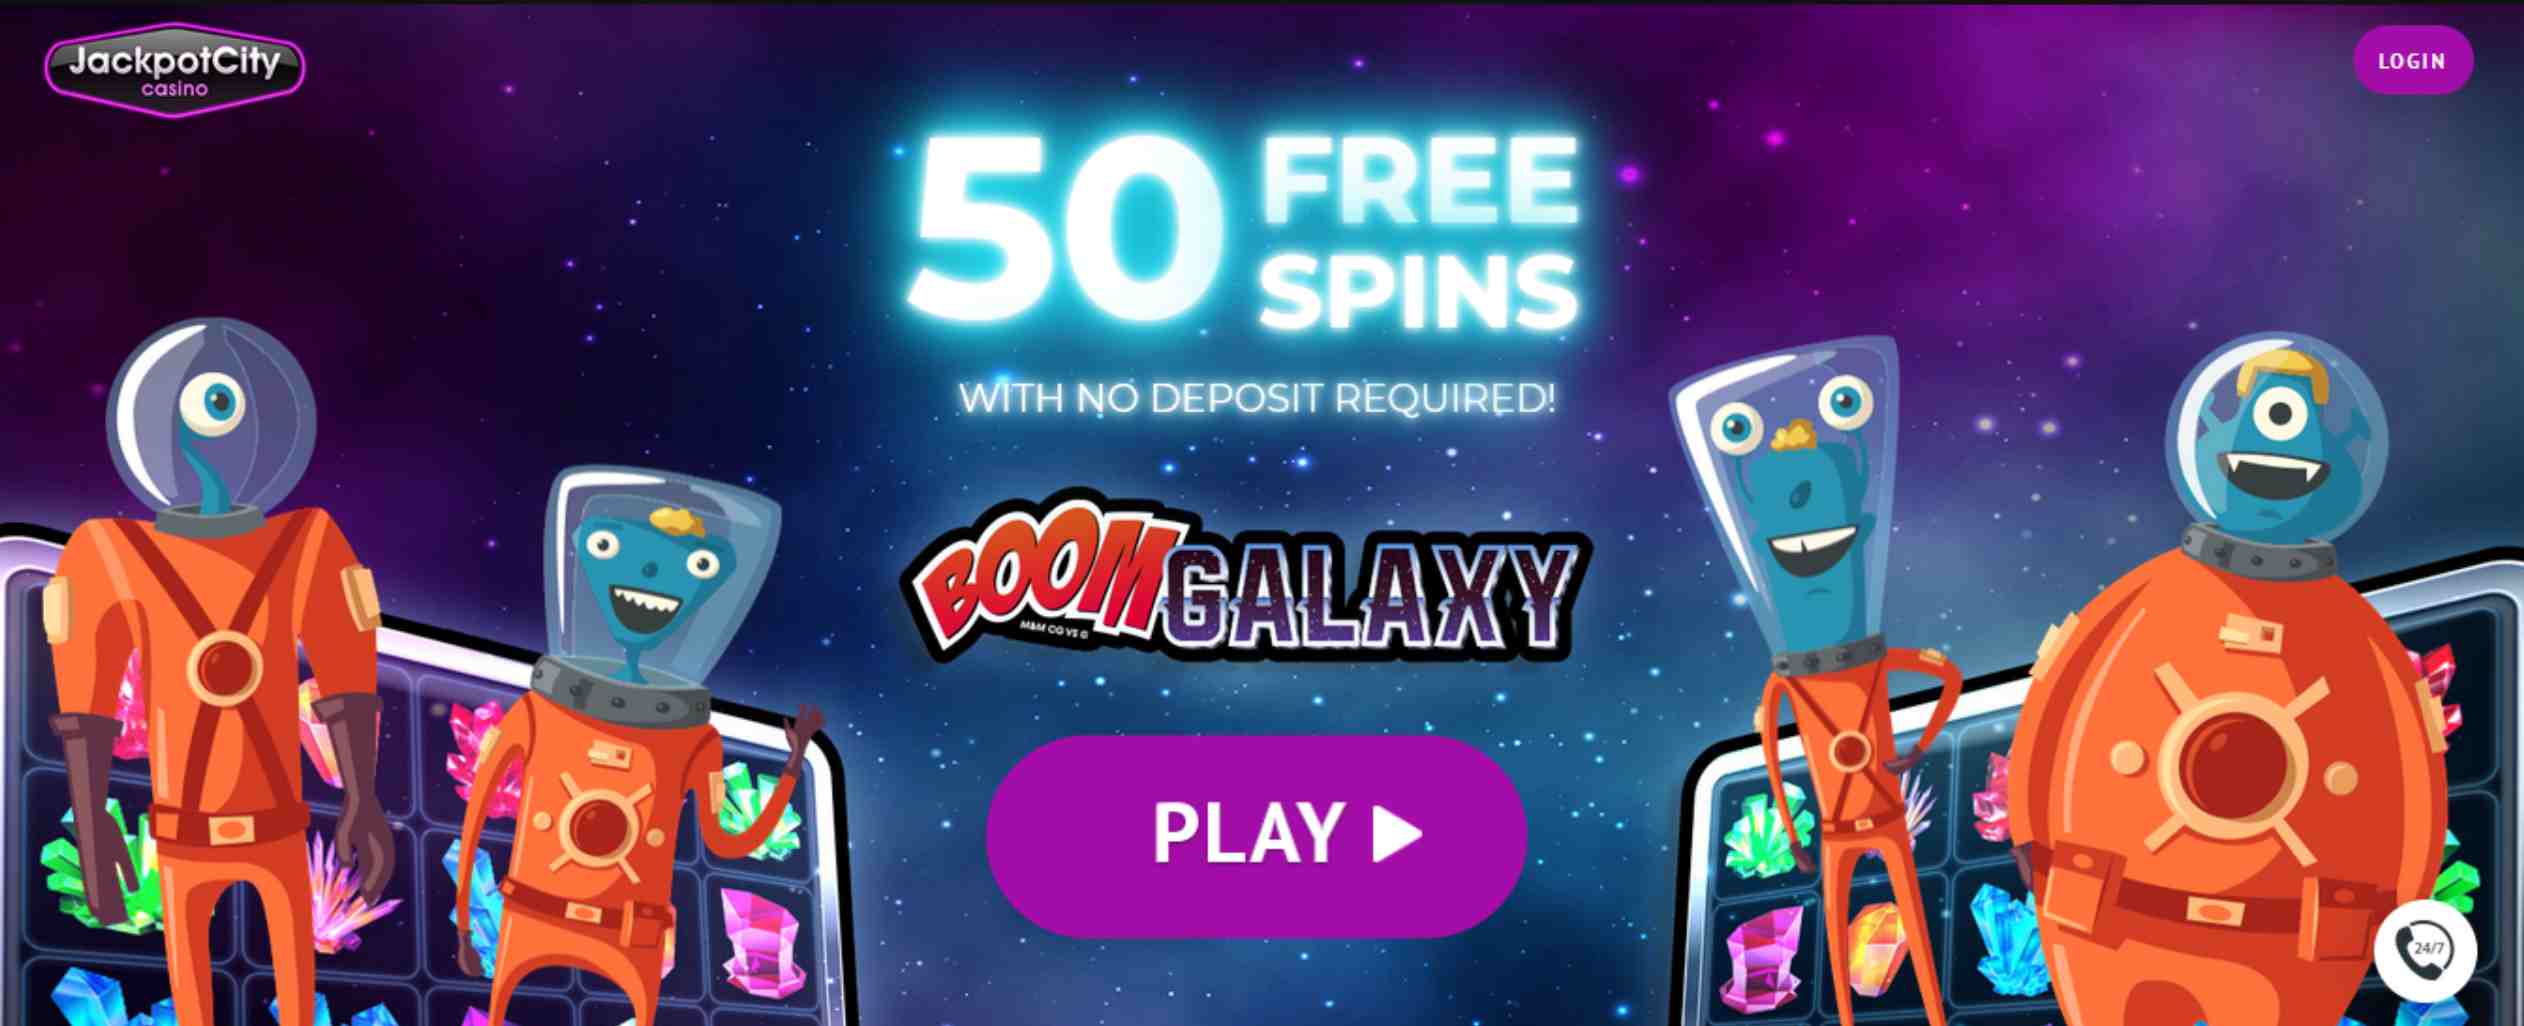 50 Free Spins With No Deposit Required